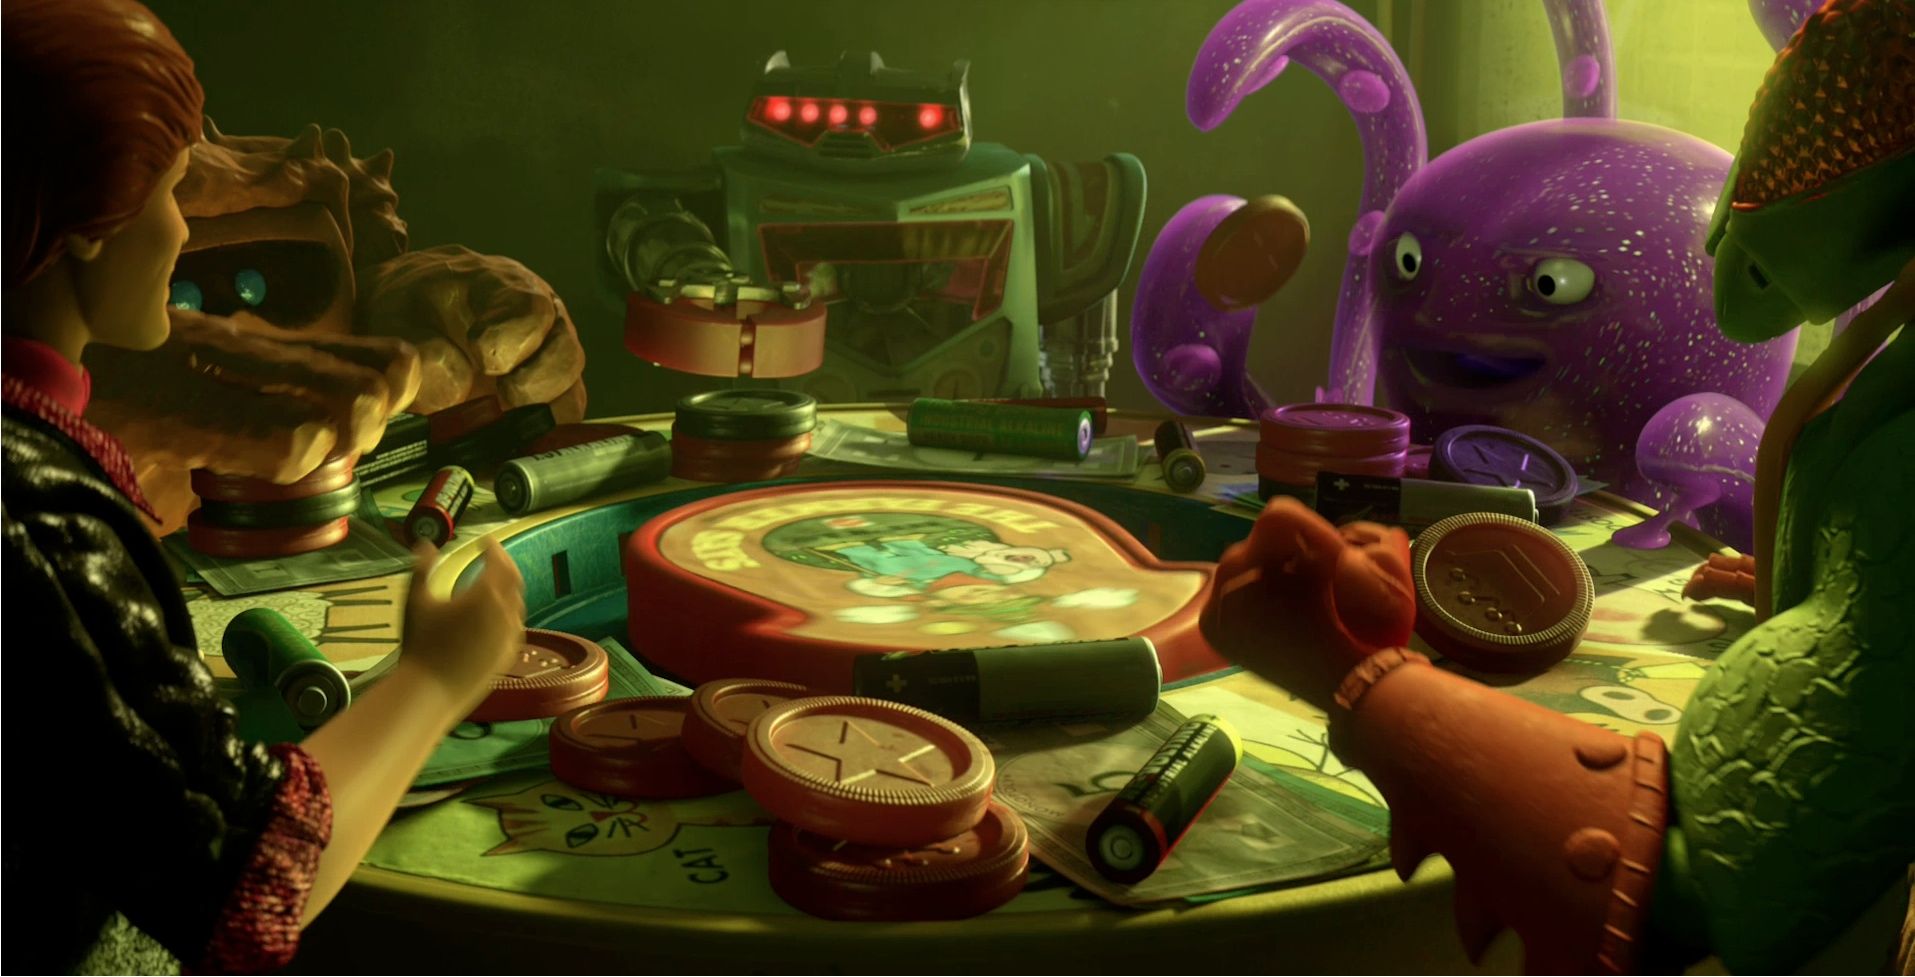 Ken plays poker with toys in Toy Story